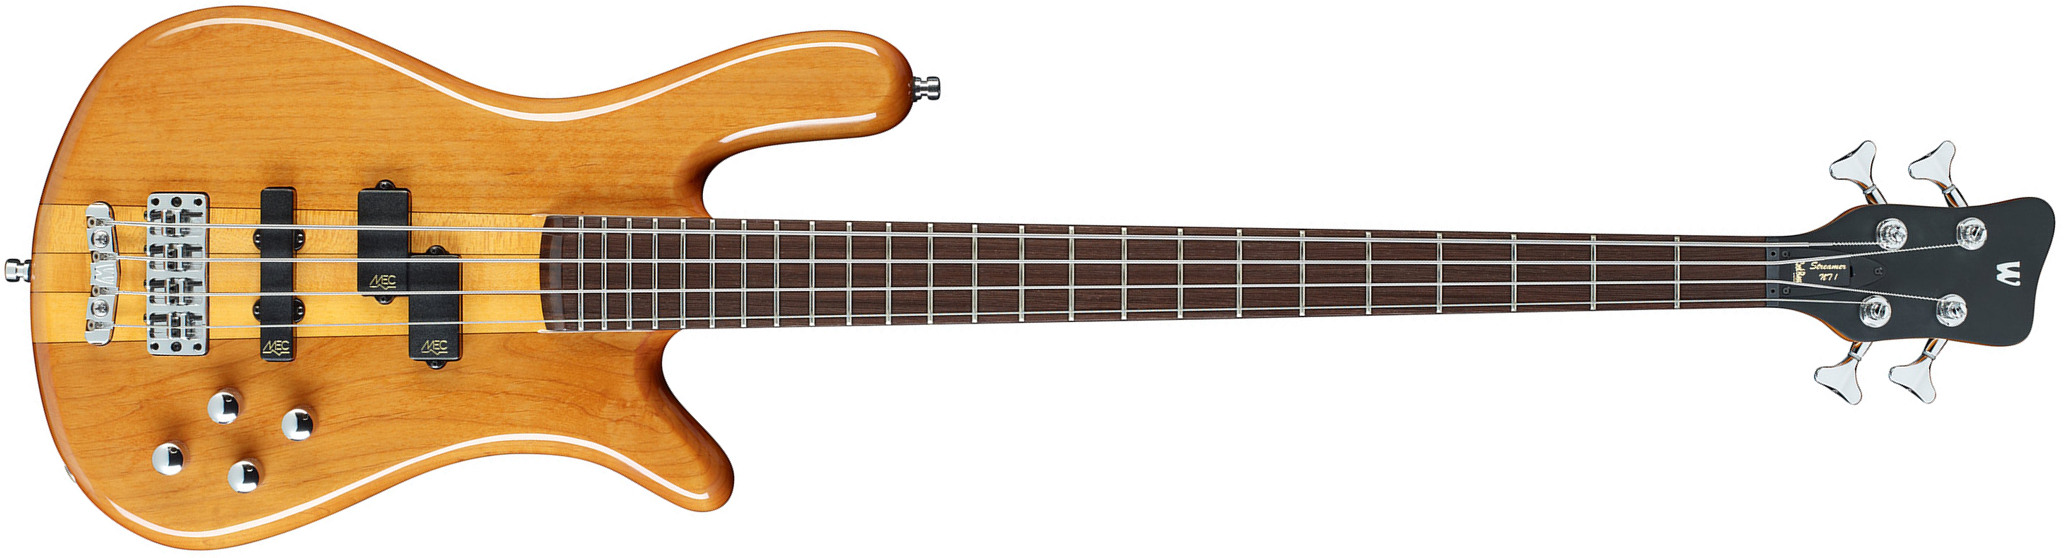 Warwick Streamer Nt4 Rockbass 4c Active Wen - Honey Violin - Solid body electric bass - Main picture